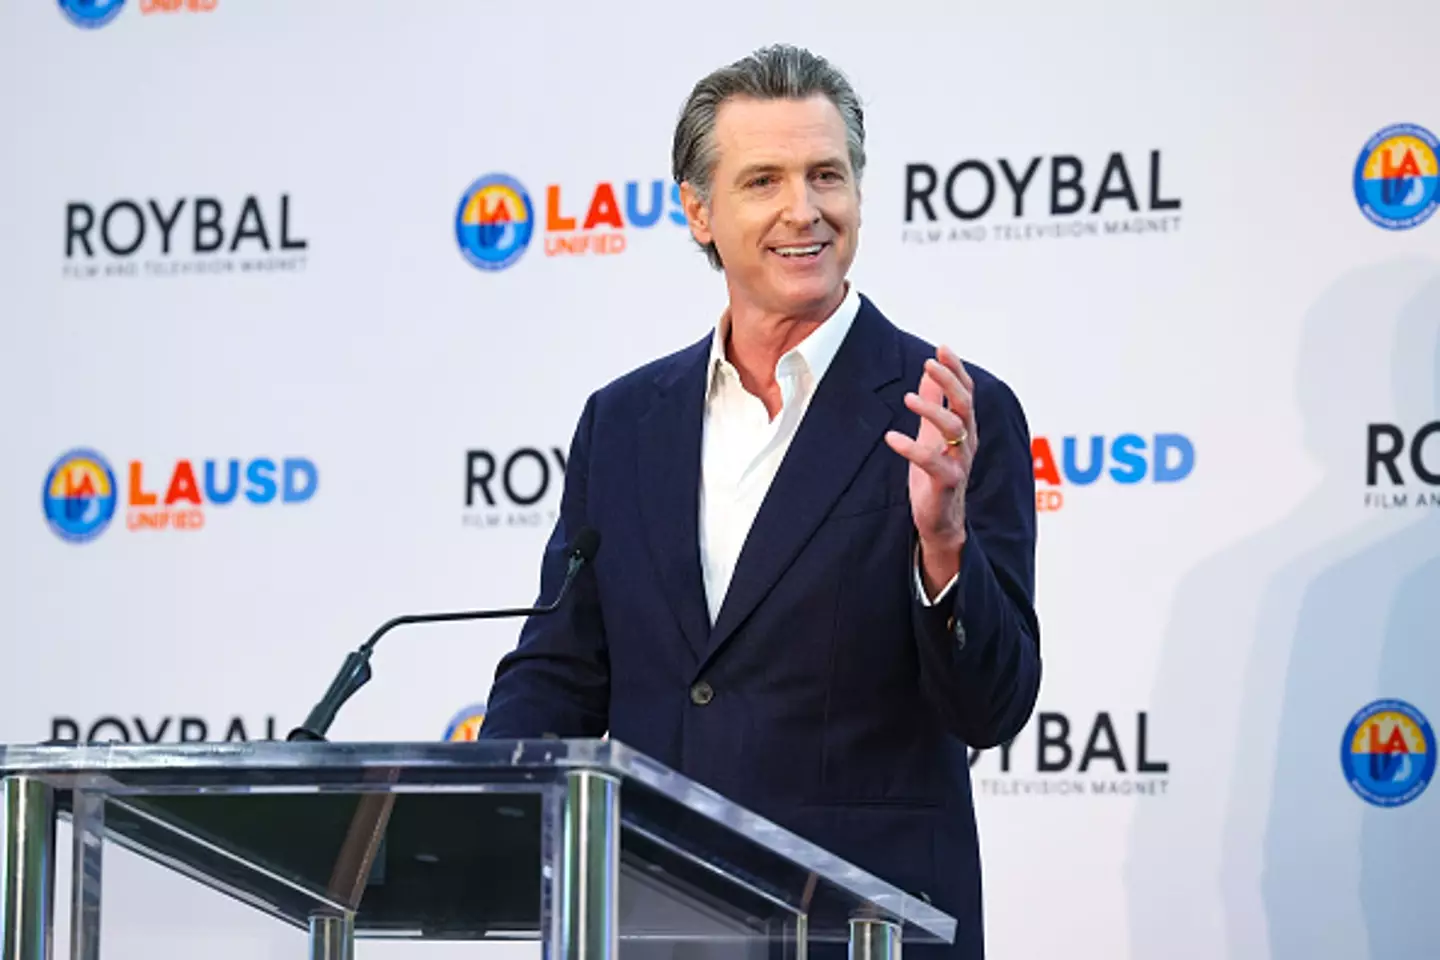 Gavin Newsom has been accused of running a 'shadow campaign' against the sitting president.